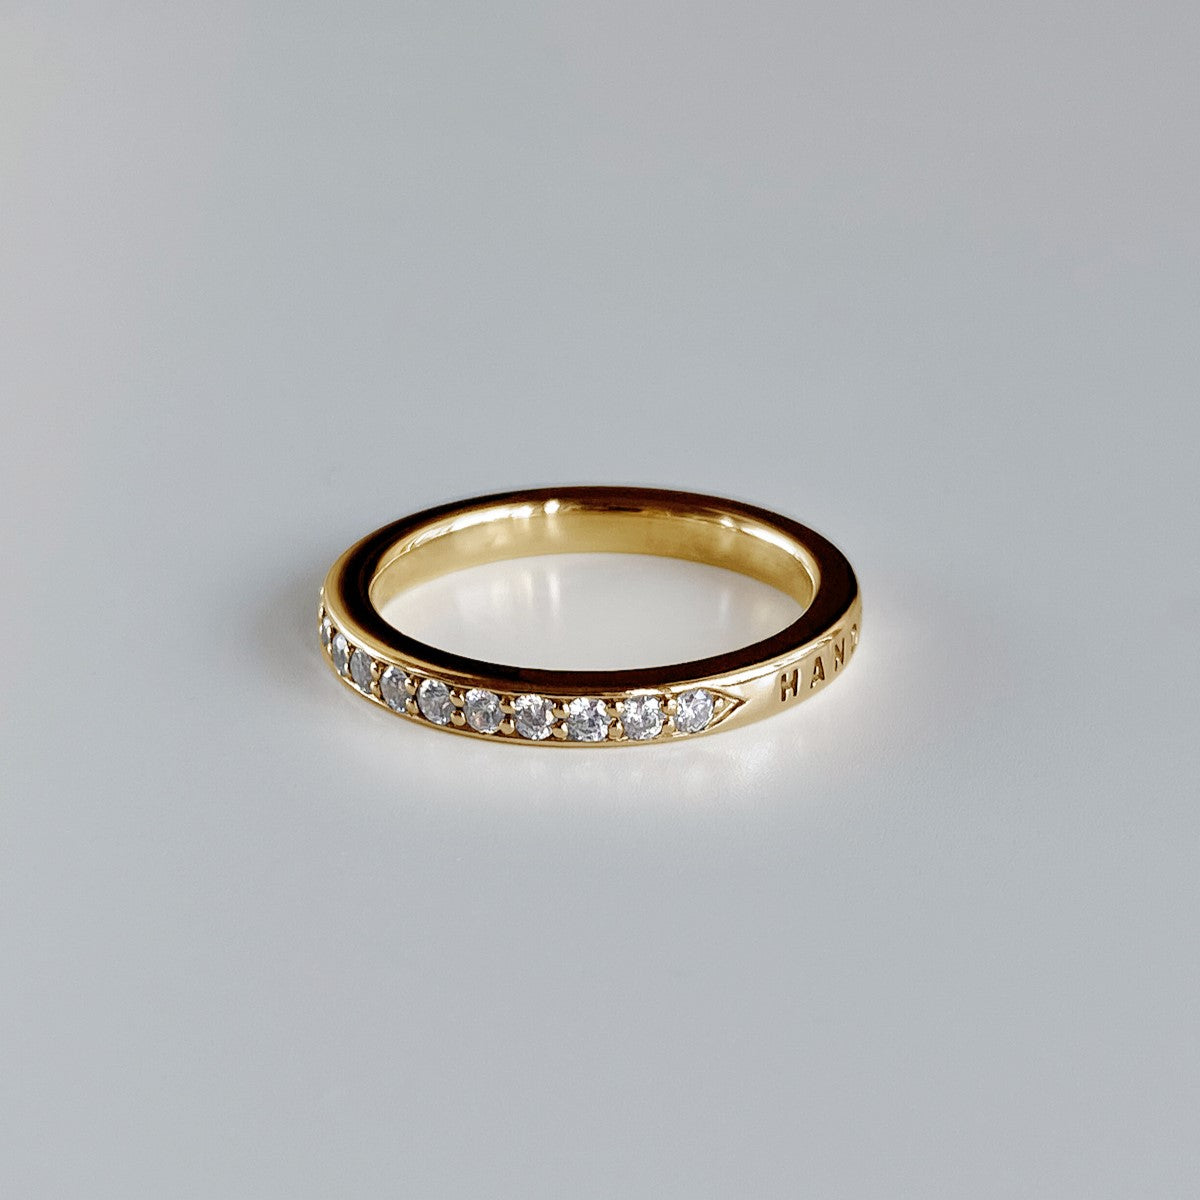 RING "MEMORIES" WITH A HALF CIRCLE OF MOISSANITE | GOLD